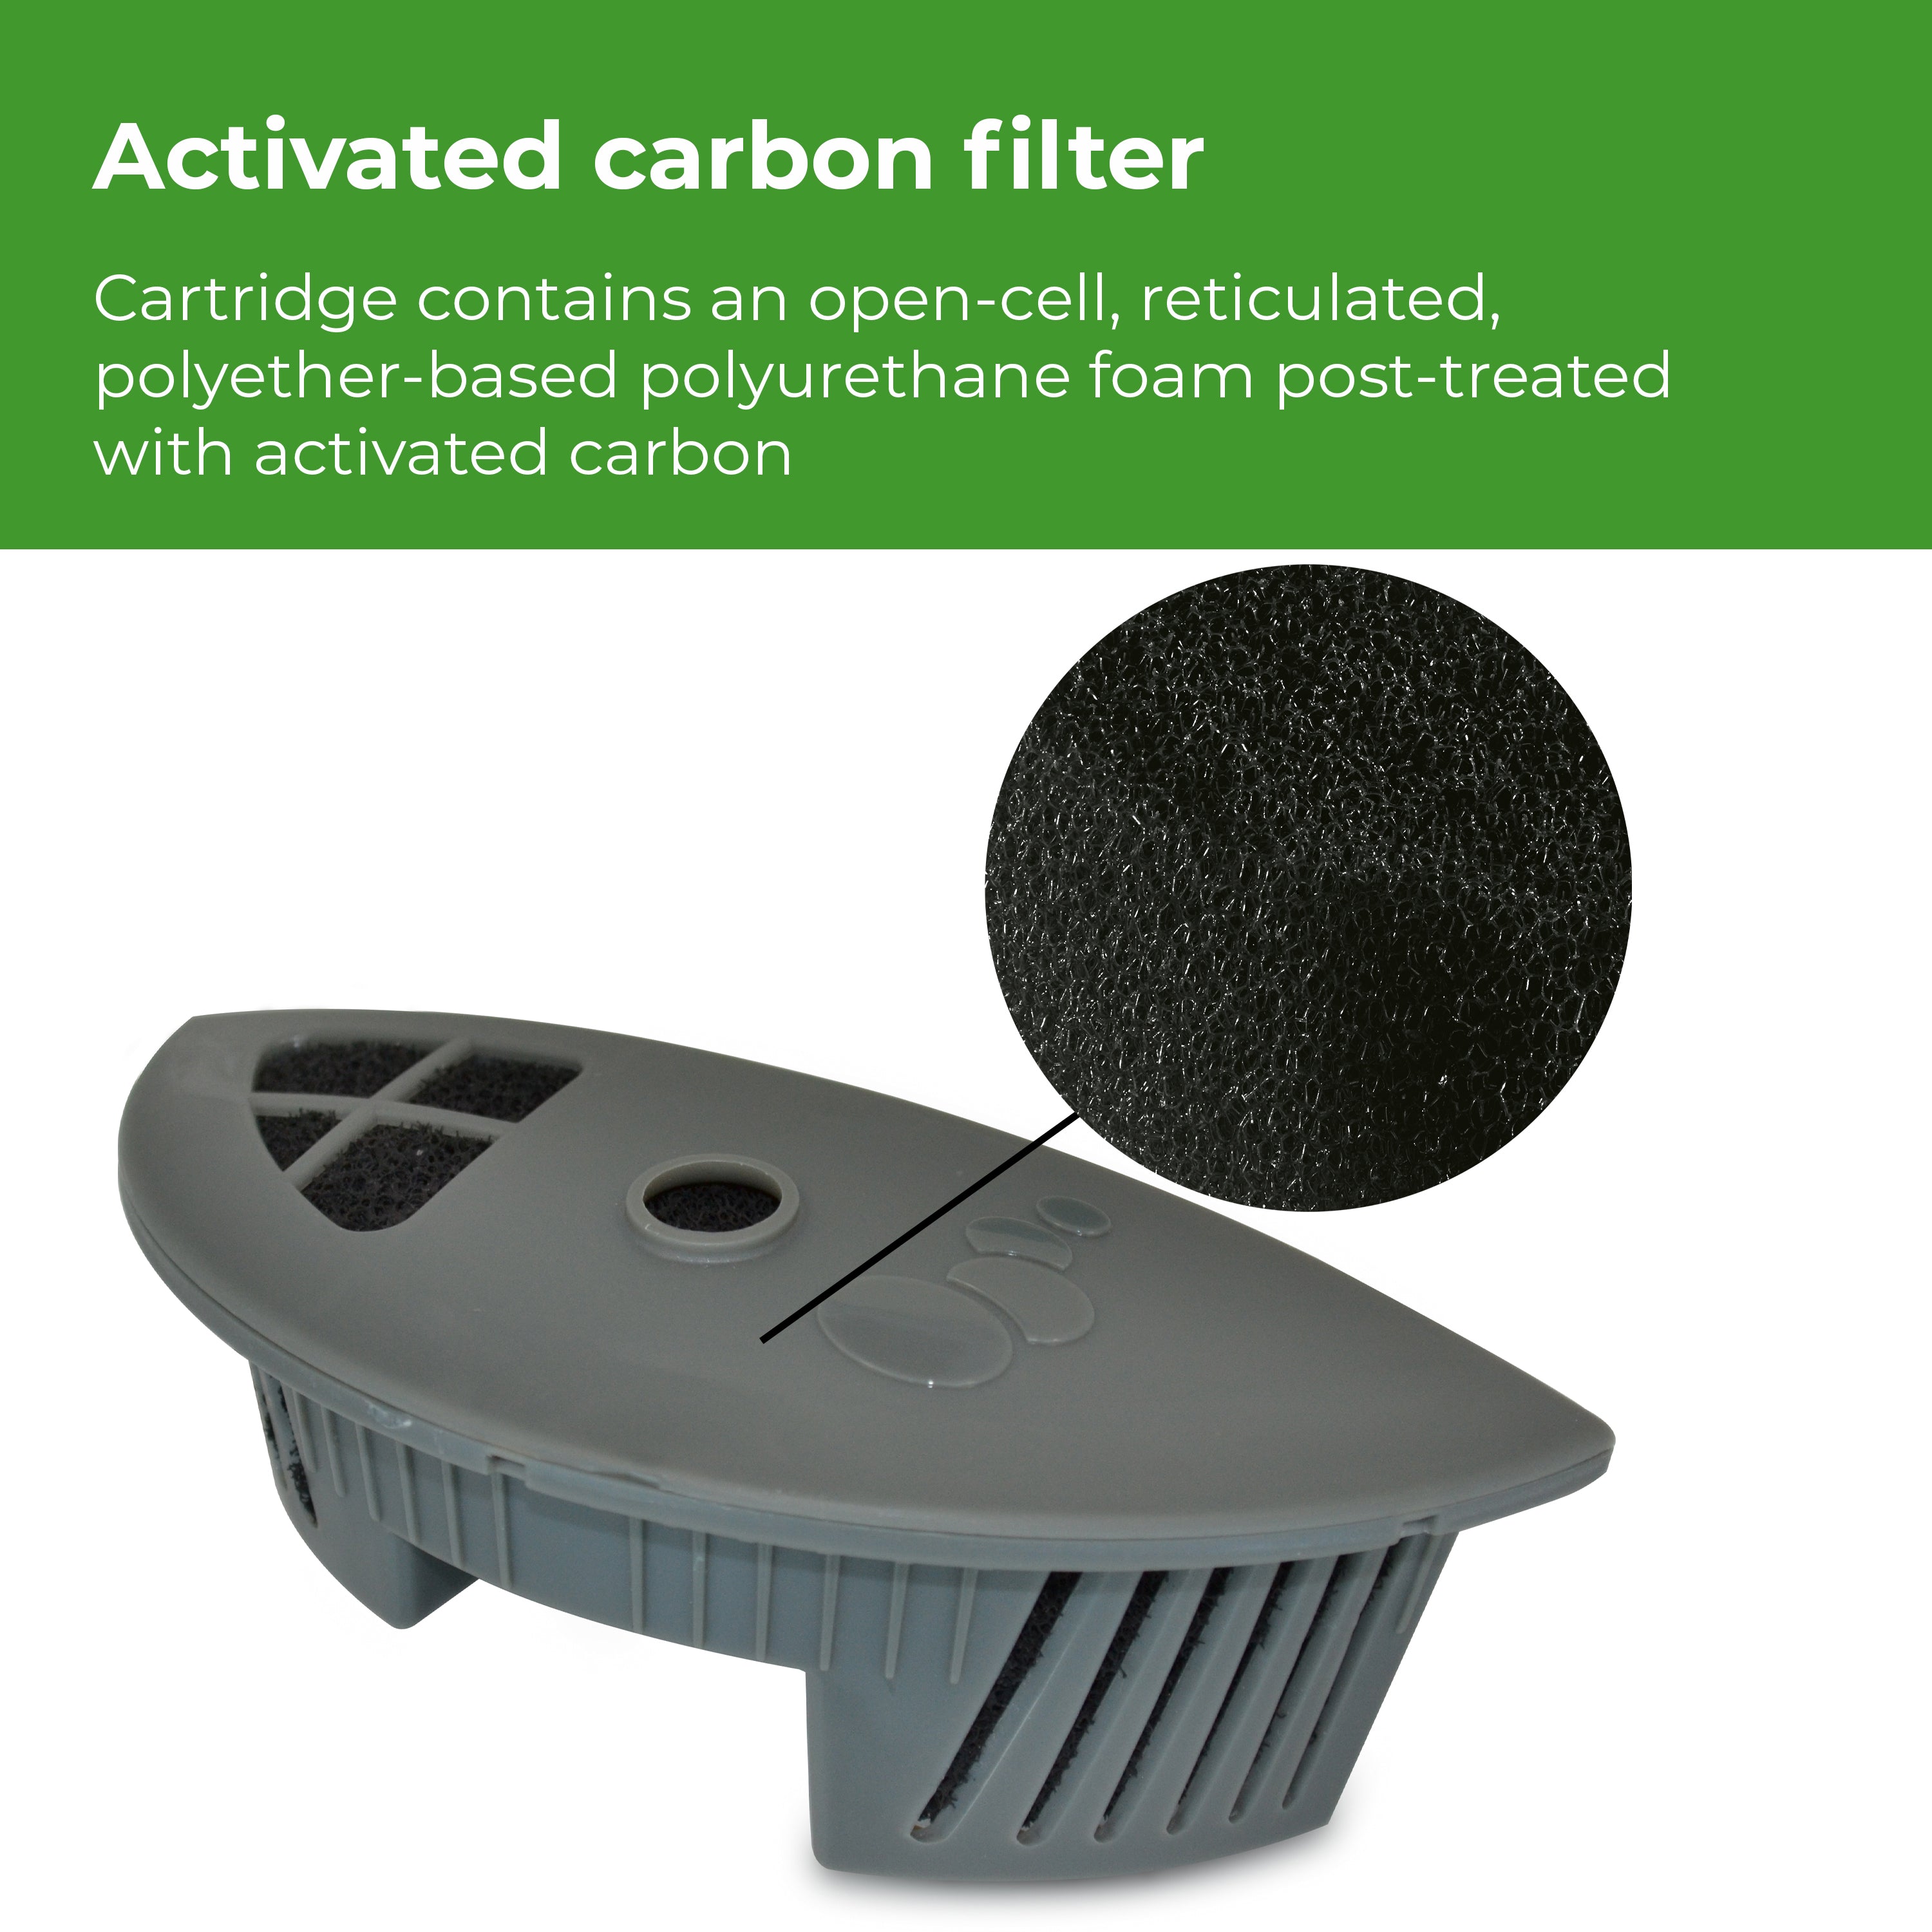 filter cartridge contains activated carbon